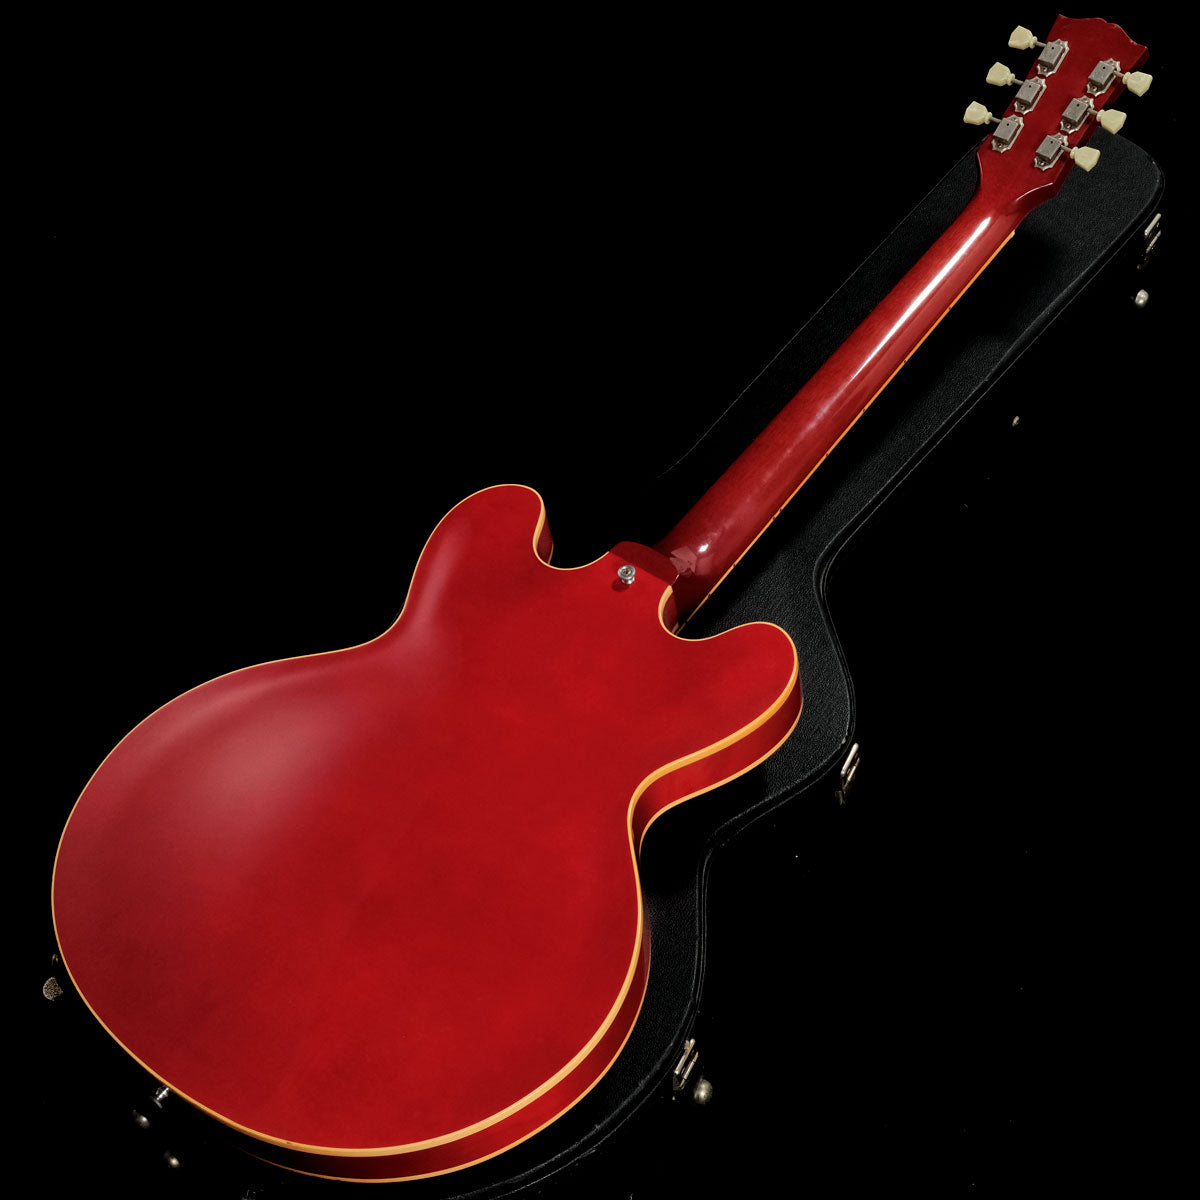 [SN A98082] USED GIBSON CUSTOM / Historic Collection 1959 ES-335 Dot Reissue Gloss Cherry [05]